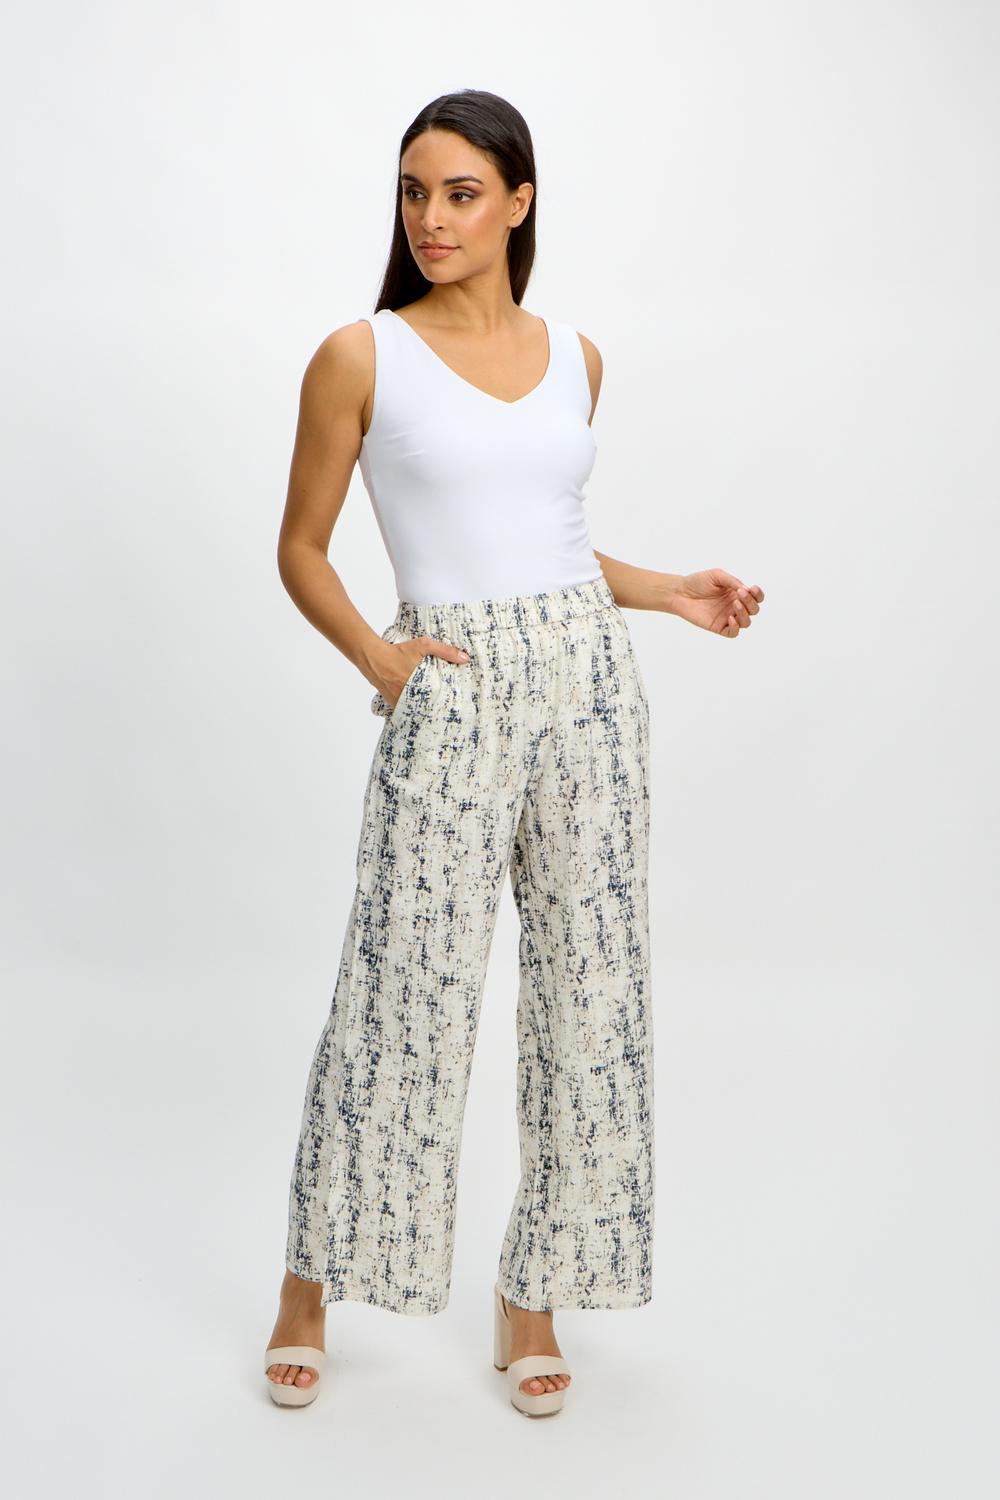 mid-rise pant style SP2413. Abstract Deep Ocean 